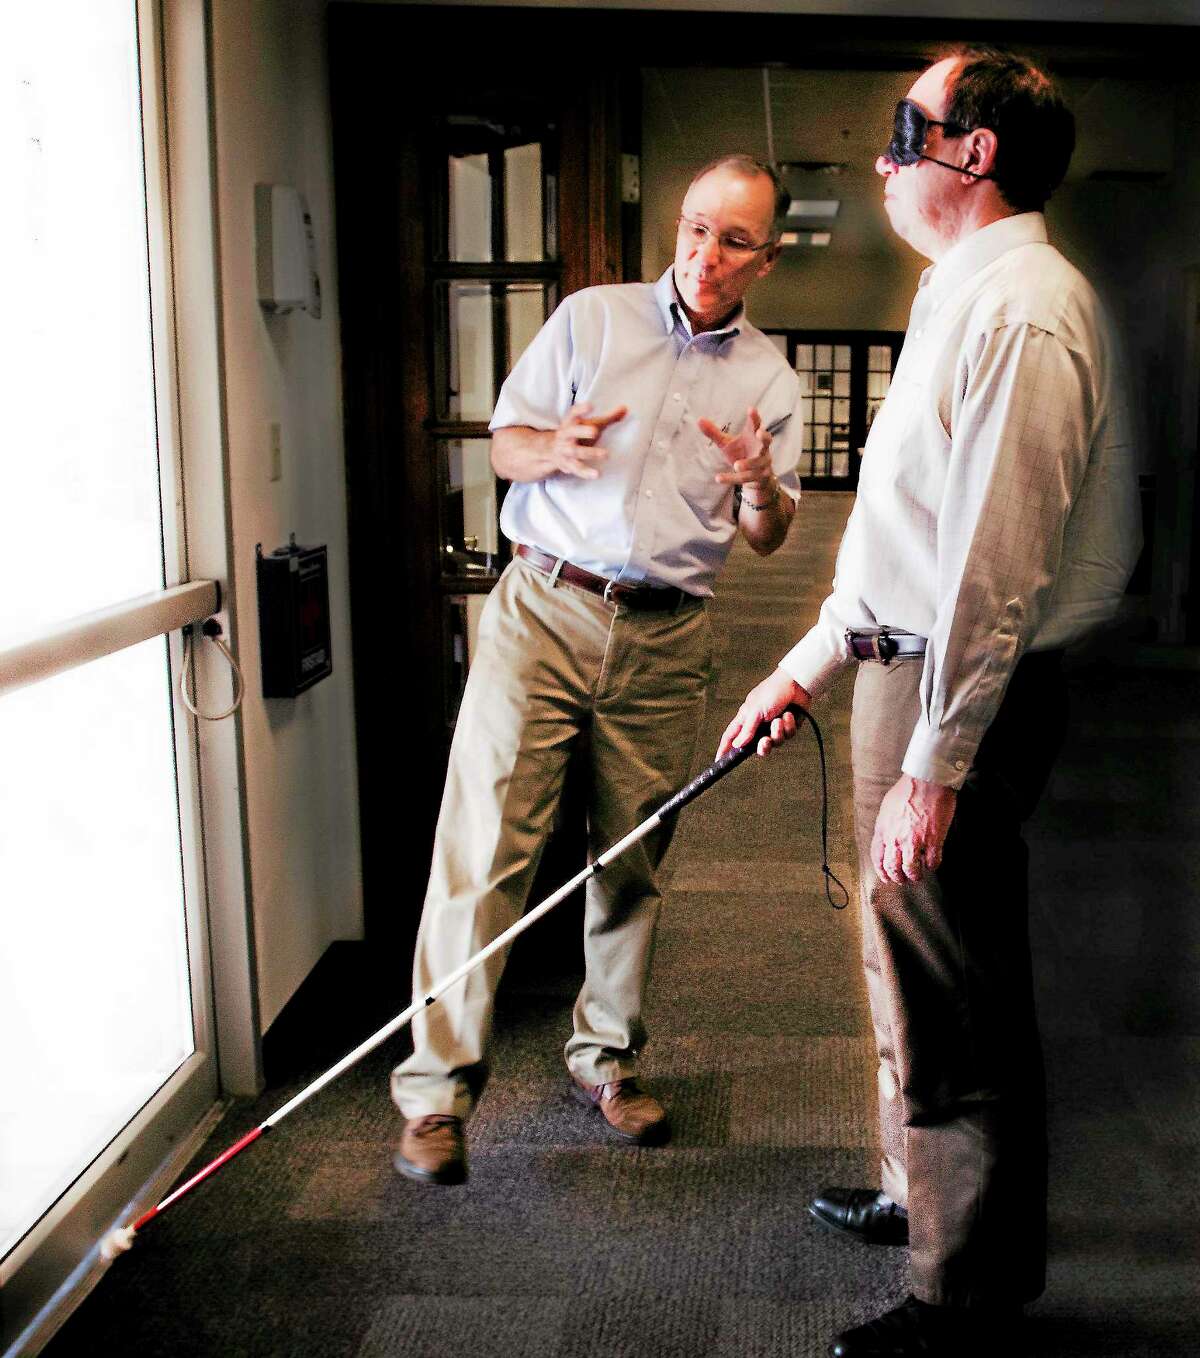 Melanie Stengel — Register John Waiculonis (L) guides reporter Ed Stannard as he learns how to navigate a doorway while blindfolded 8/20.